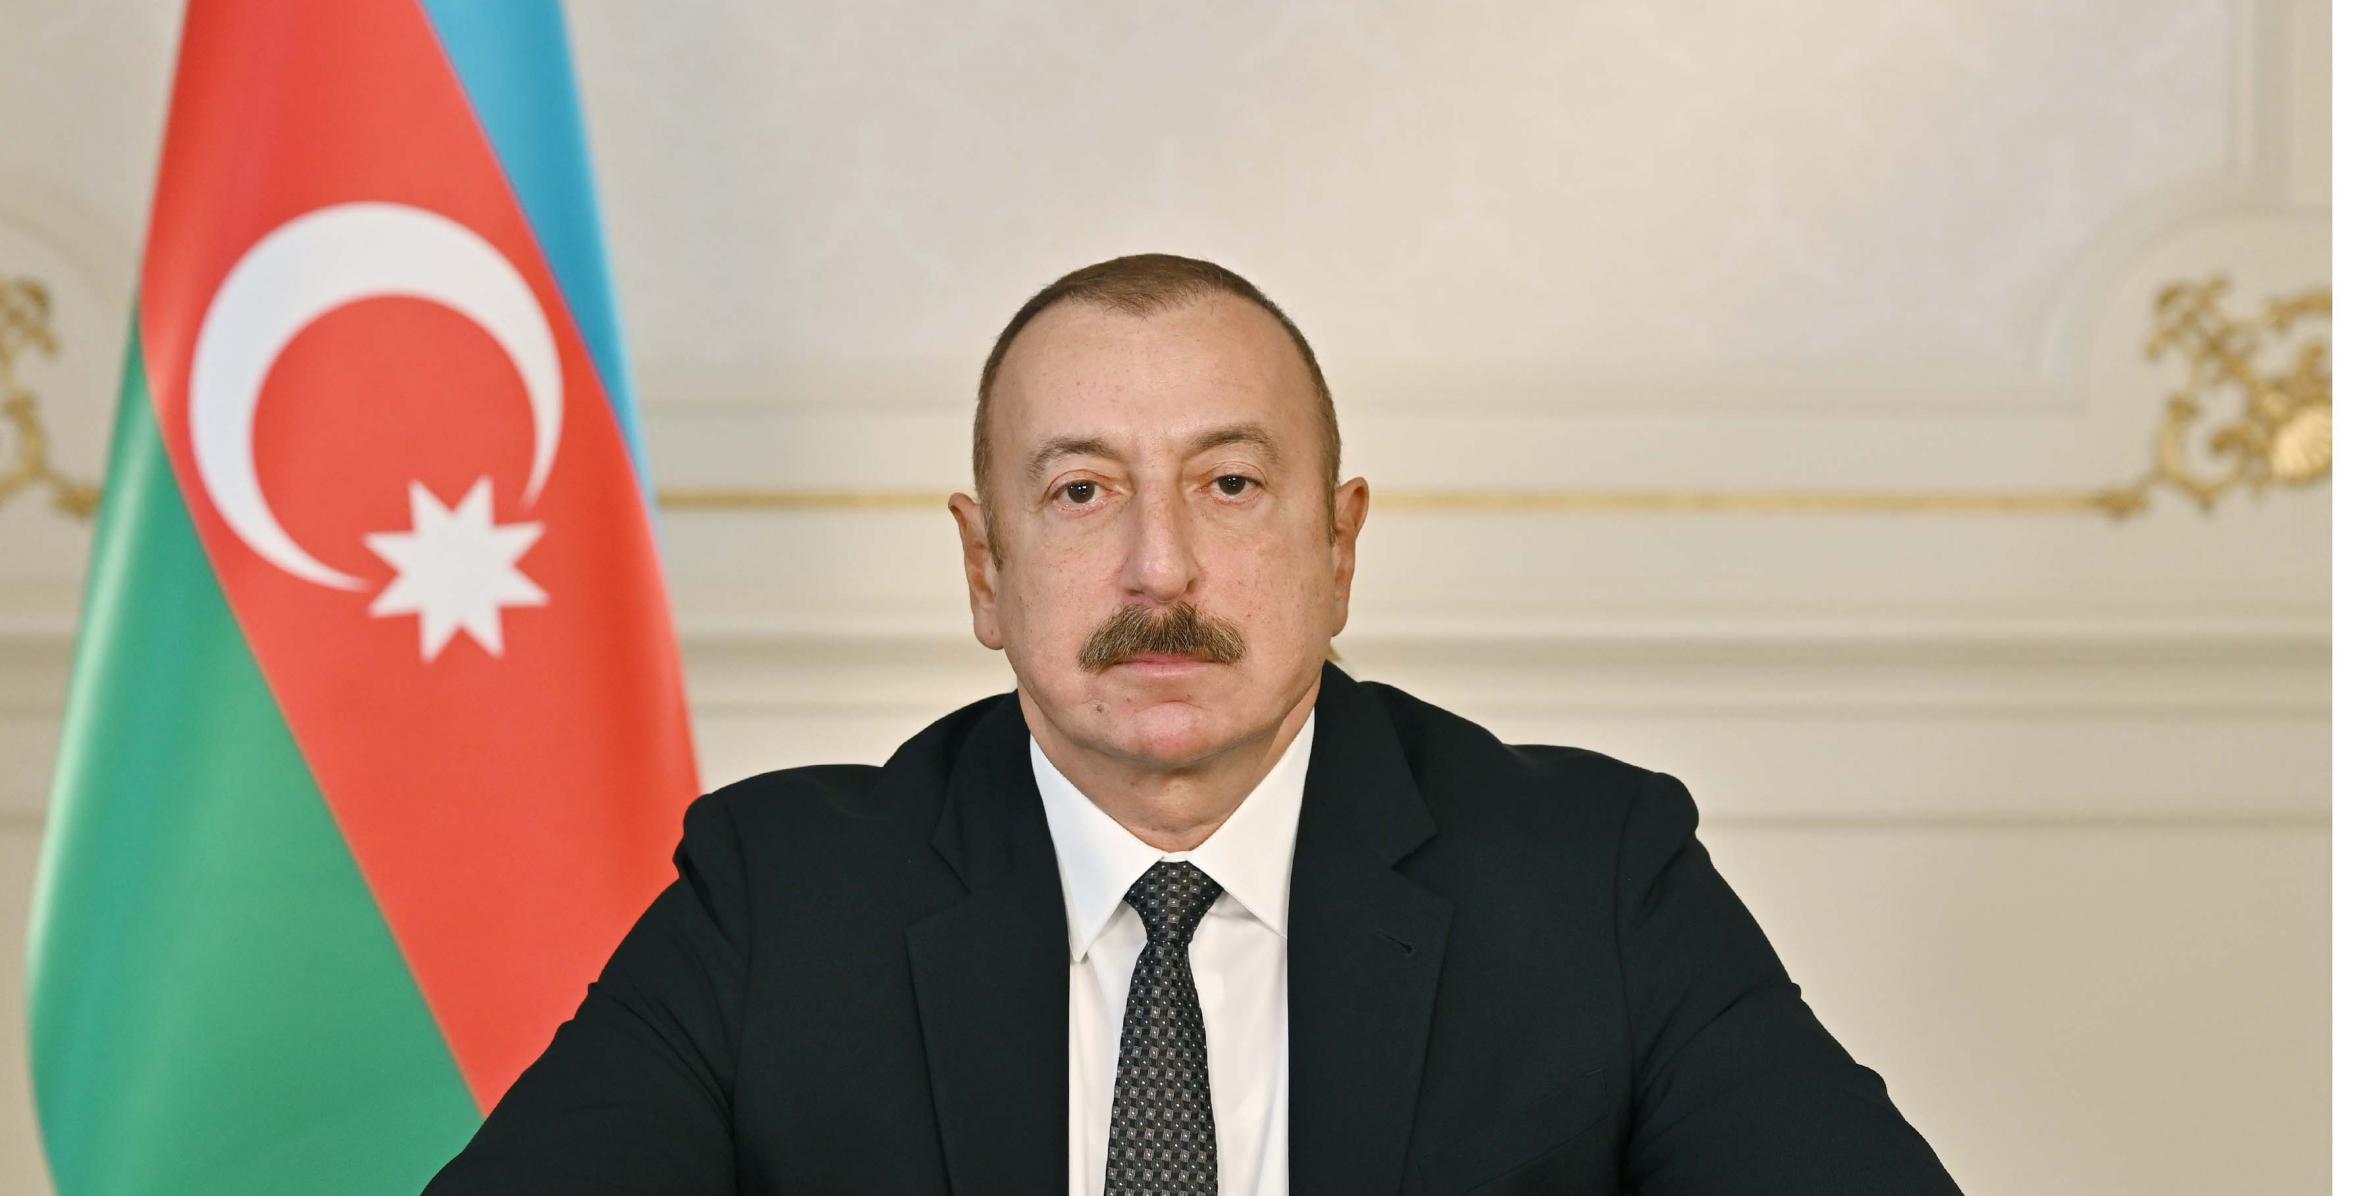 Address by the President Ilham Aliyev on the occasion of the Day of Solidarity of World Azerbaijanis and the New Year